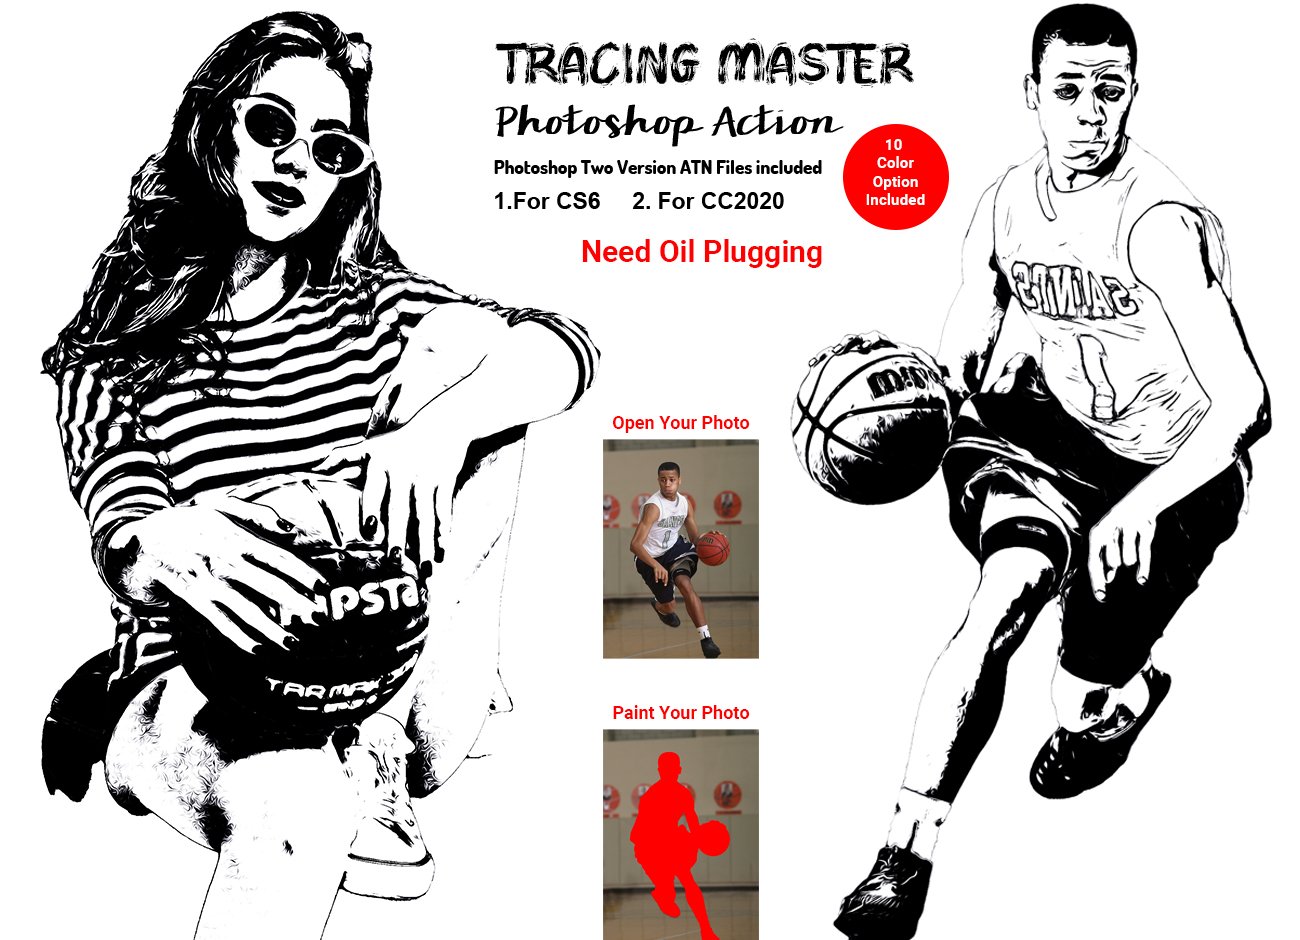 Tracing Master Photoshop Actioncover image.